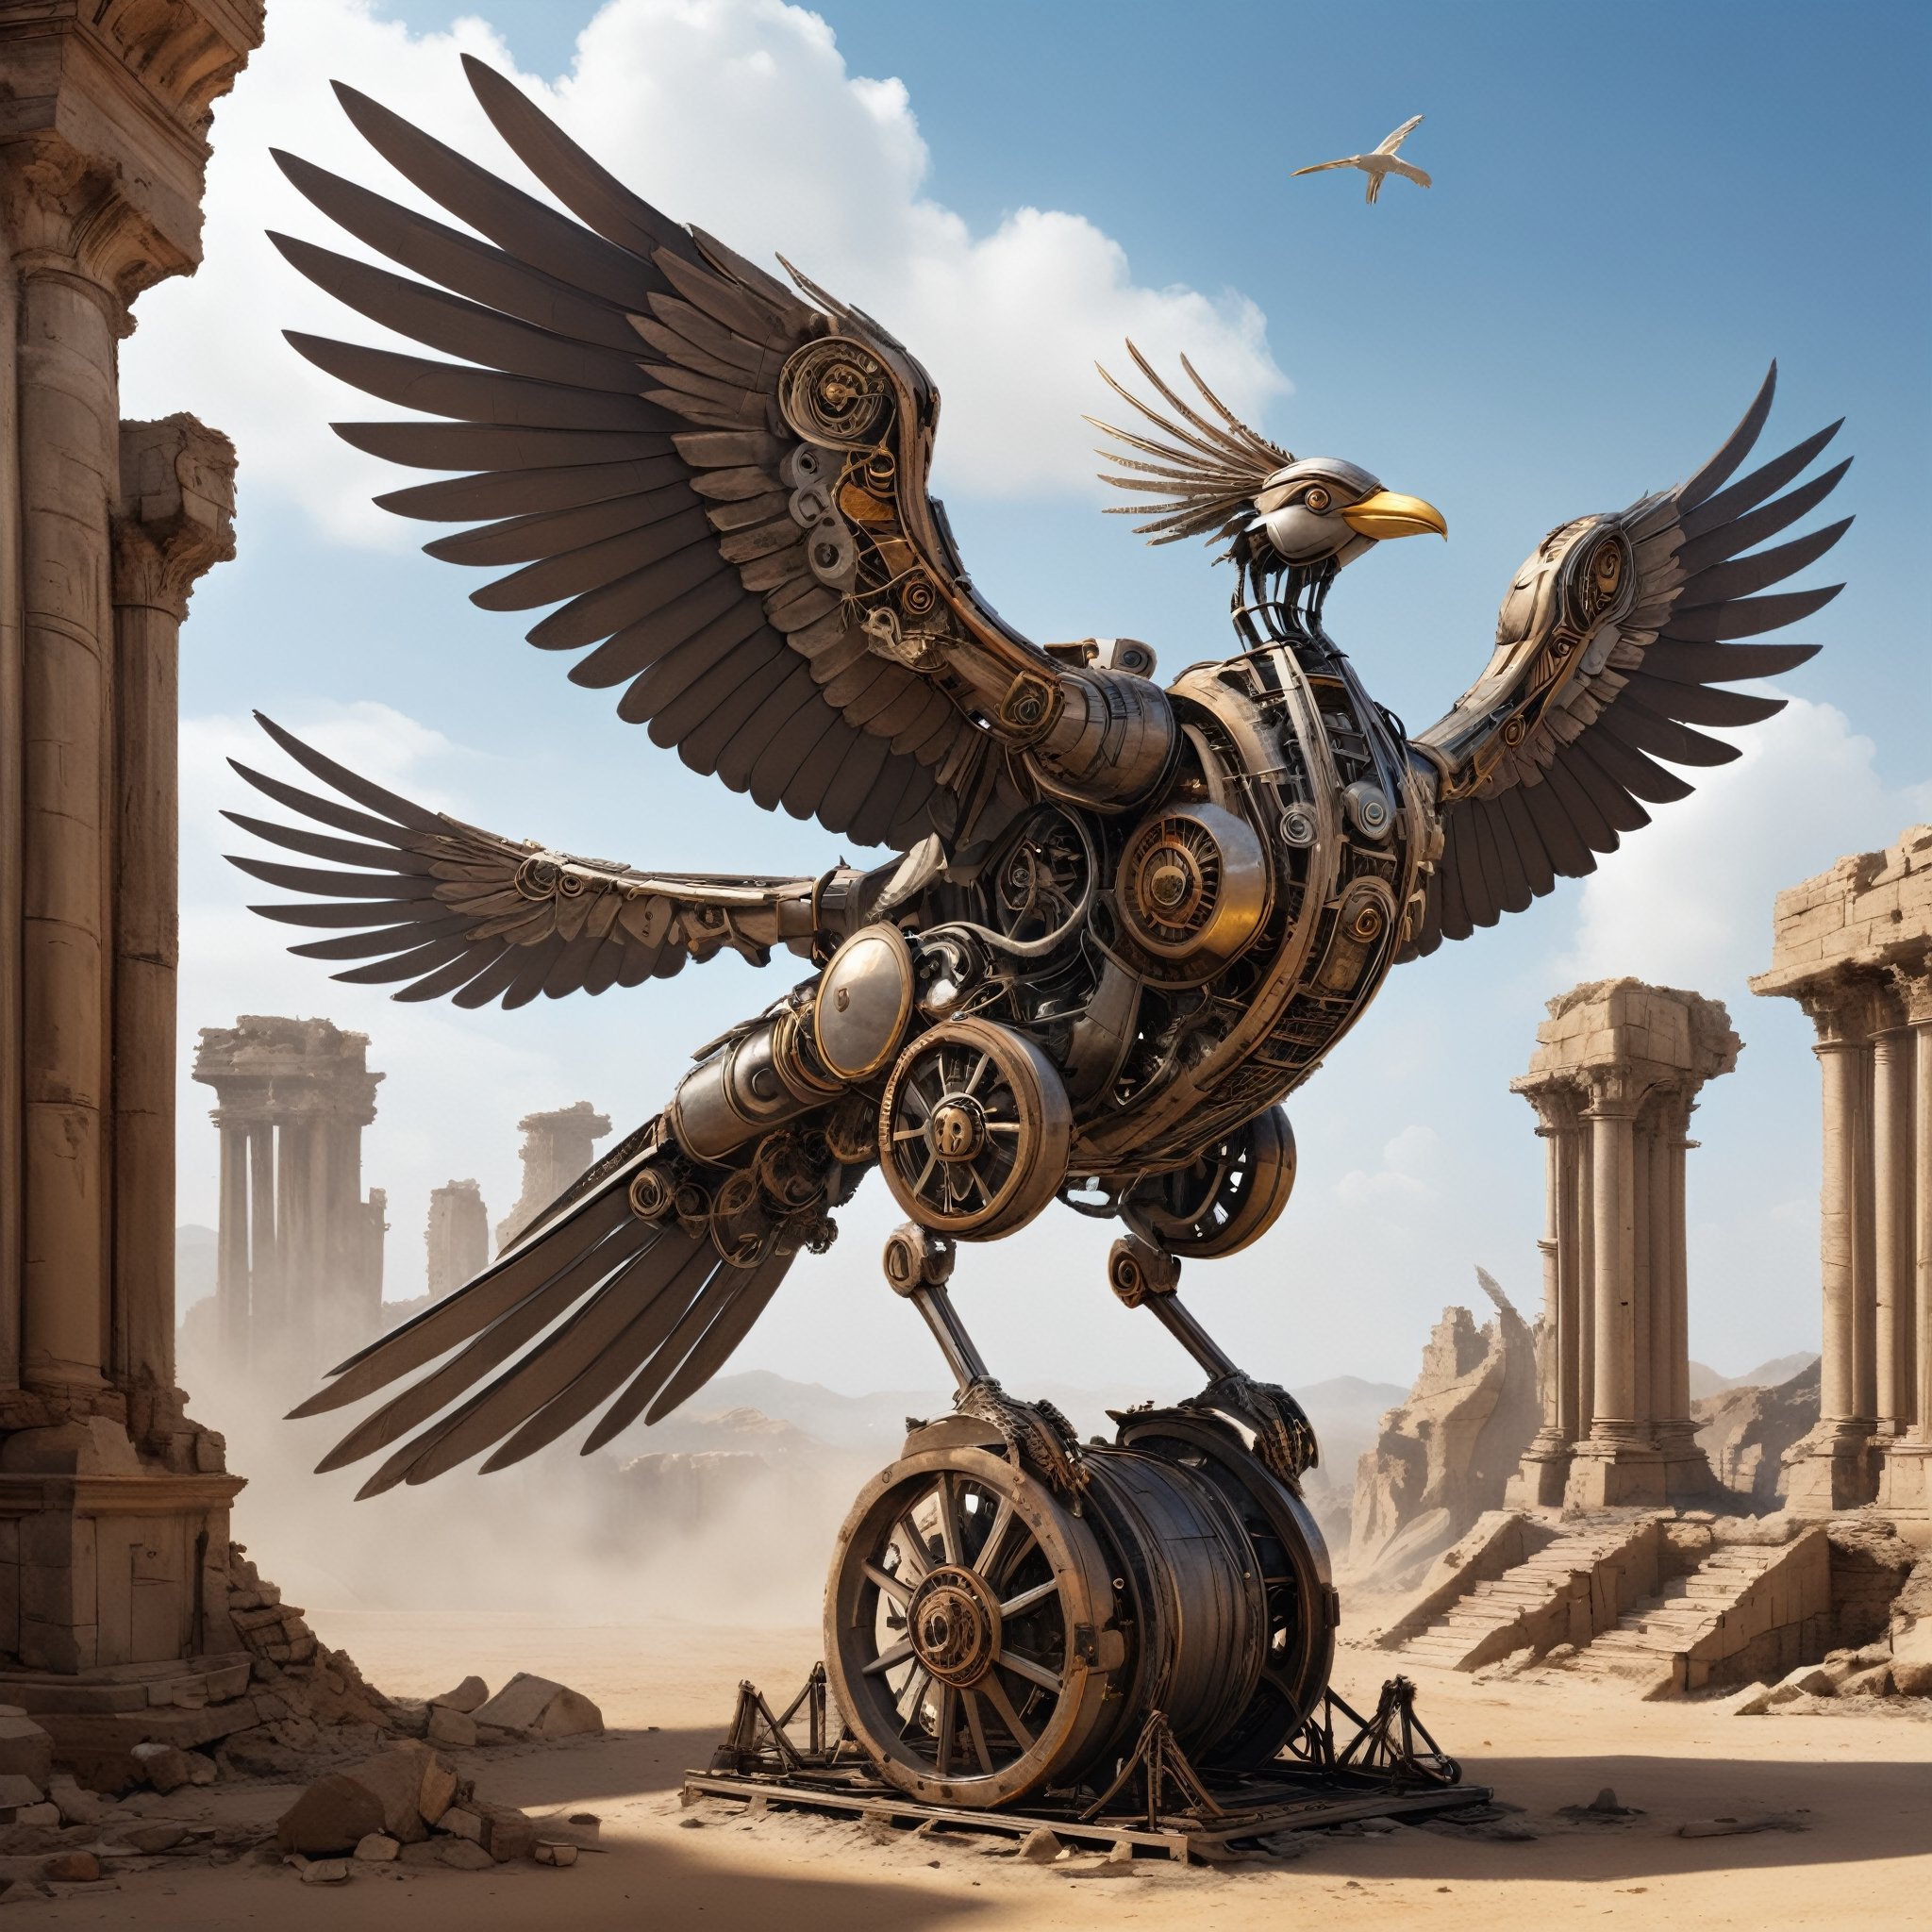 The image depicts a fantastical scene featuring a large mechanical bird with an appearance reminiscent of steampunk design, positioned in the midst of ancient ruins resembling a desert landscape. The mechanical creature is designed with intricate metalwork and boasts large, bird-like wings, as well as wheel appendages that give it the ability to move across the ground. Smoke is emanating from the top of the structure, suggesting that it is powered by some form of steam technology. There are towering structures and ruins in the background, enhancing the otherworldly feel of the environment depicted. The sky is clear with a few birds visible, further emphasizing the theme of flight